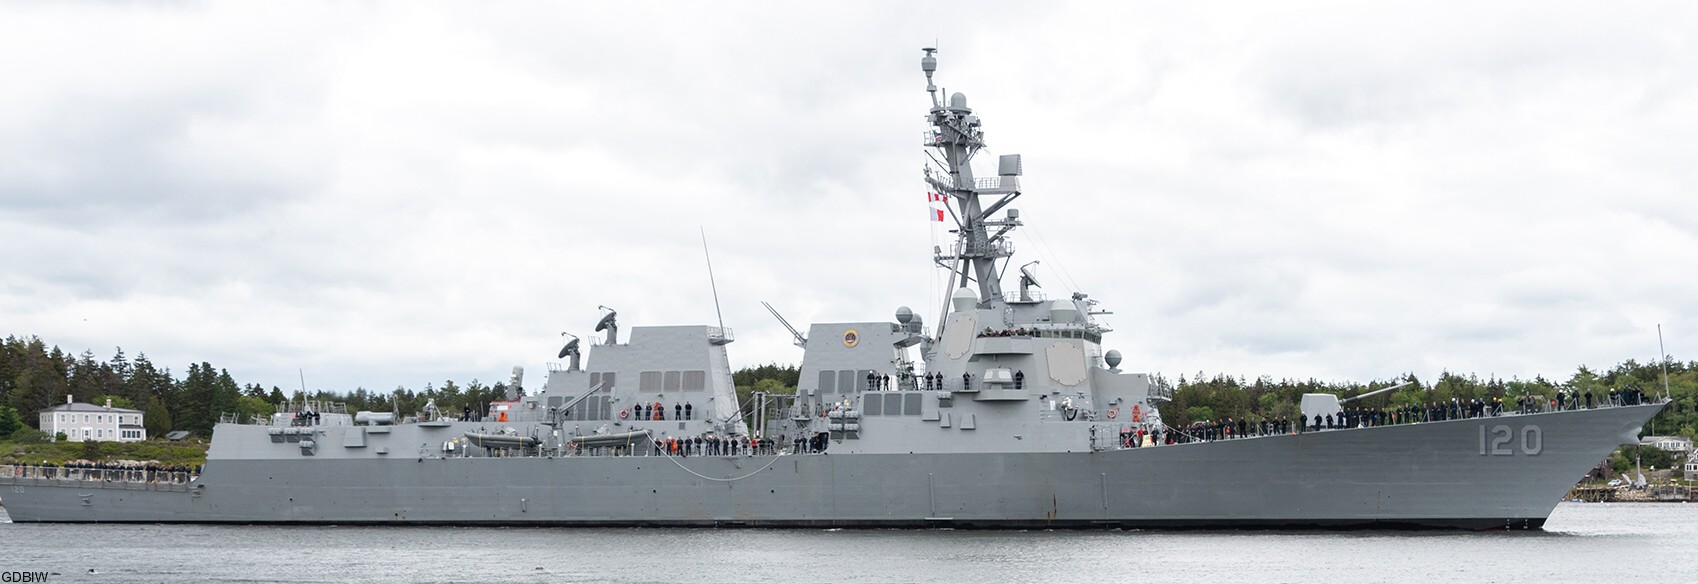 ddg-120 uss carl m. levin arleigh burke class guided missile destroyer 42